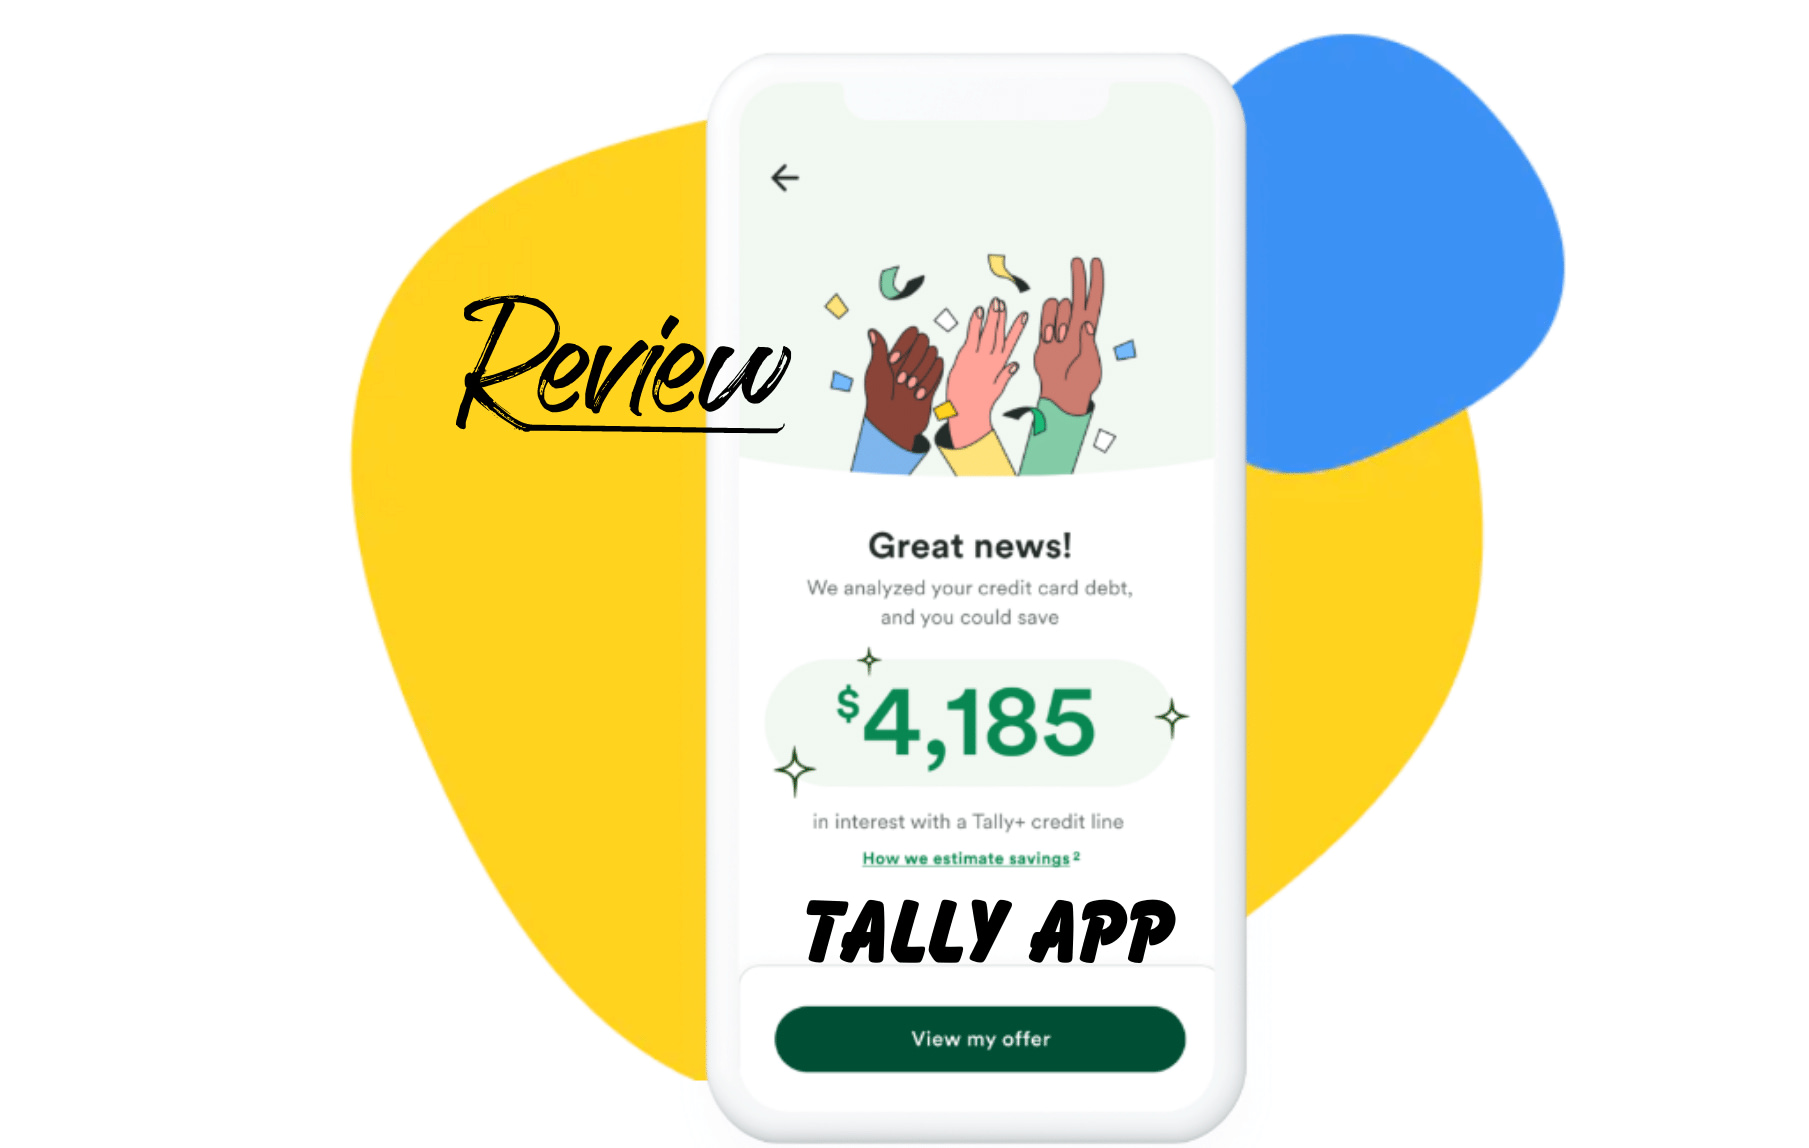 Read our Tally review to learn how Tally App